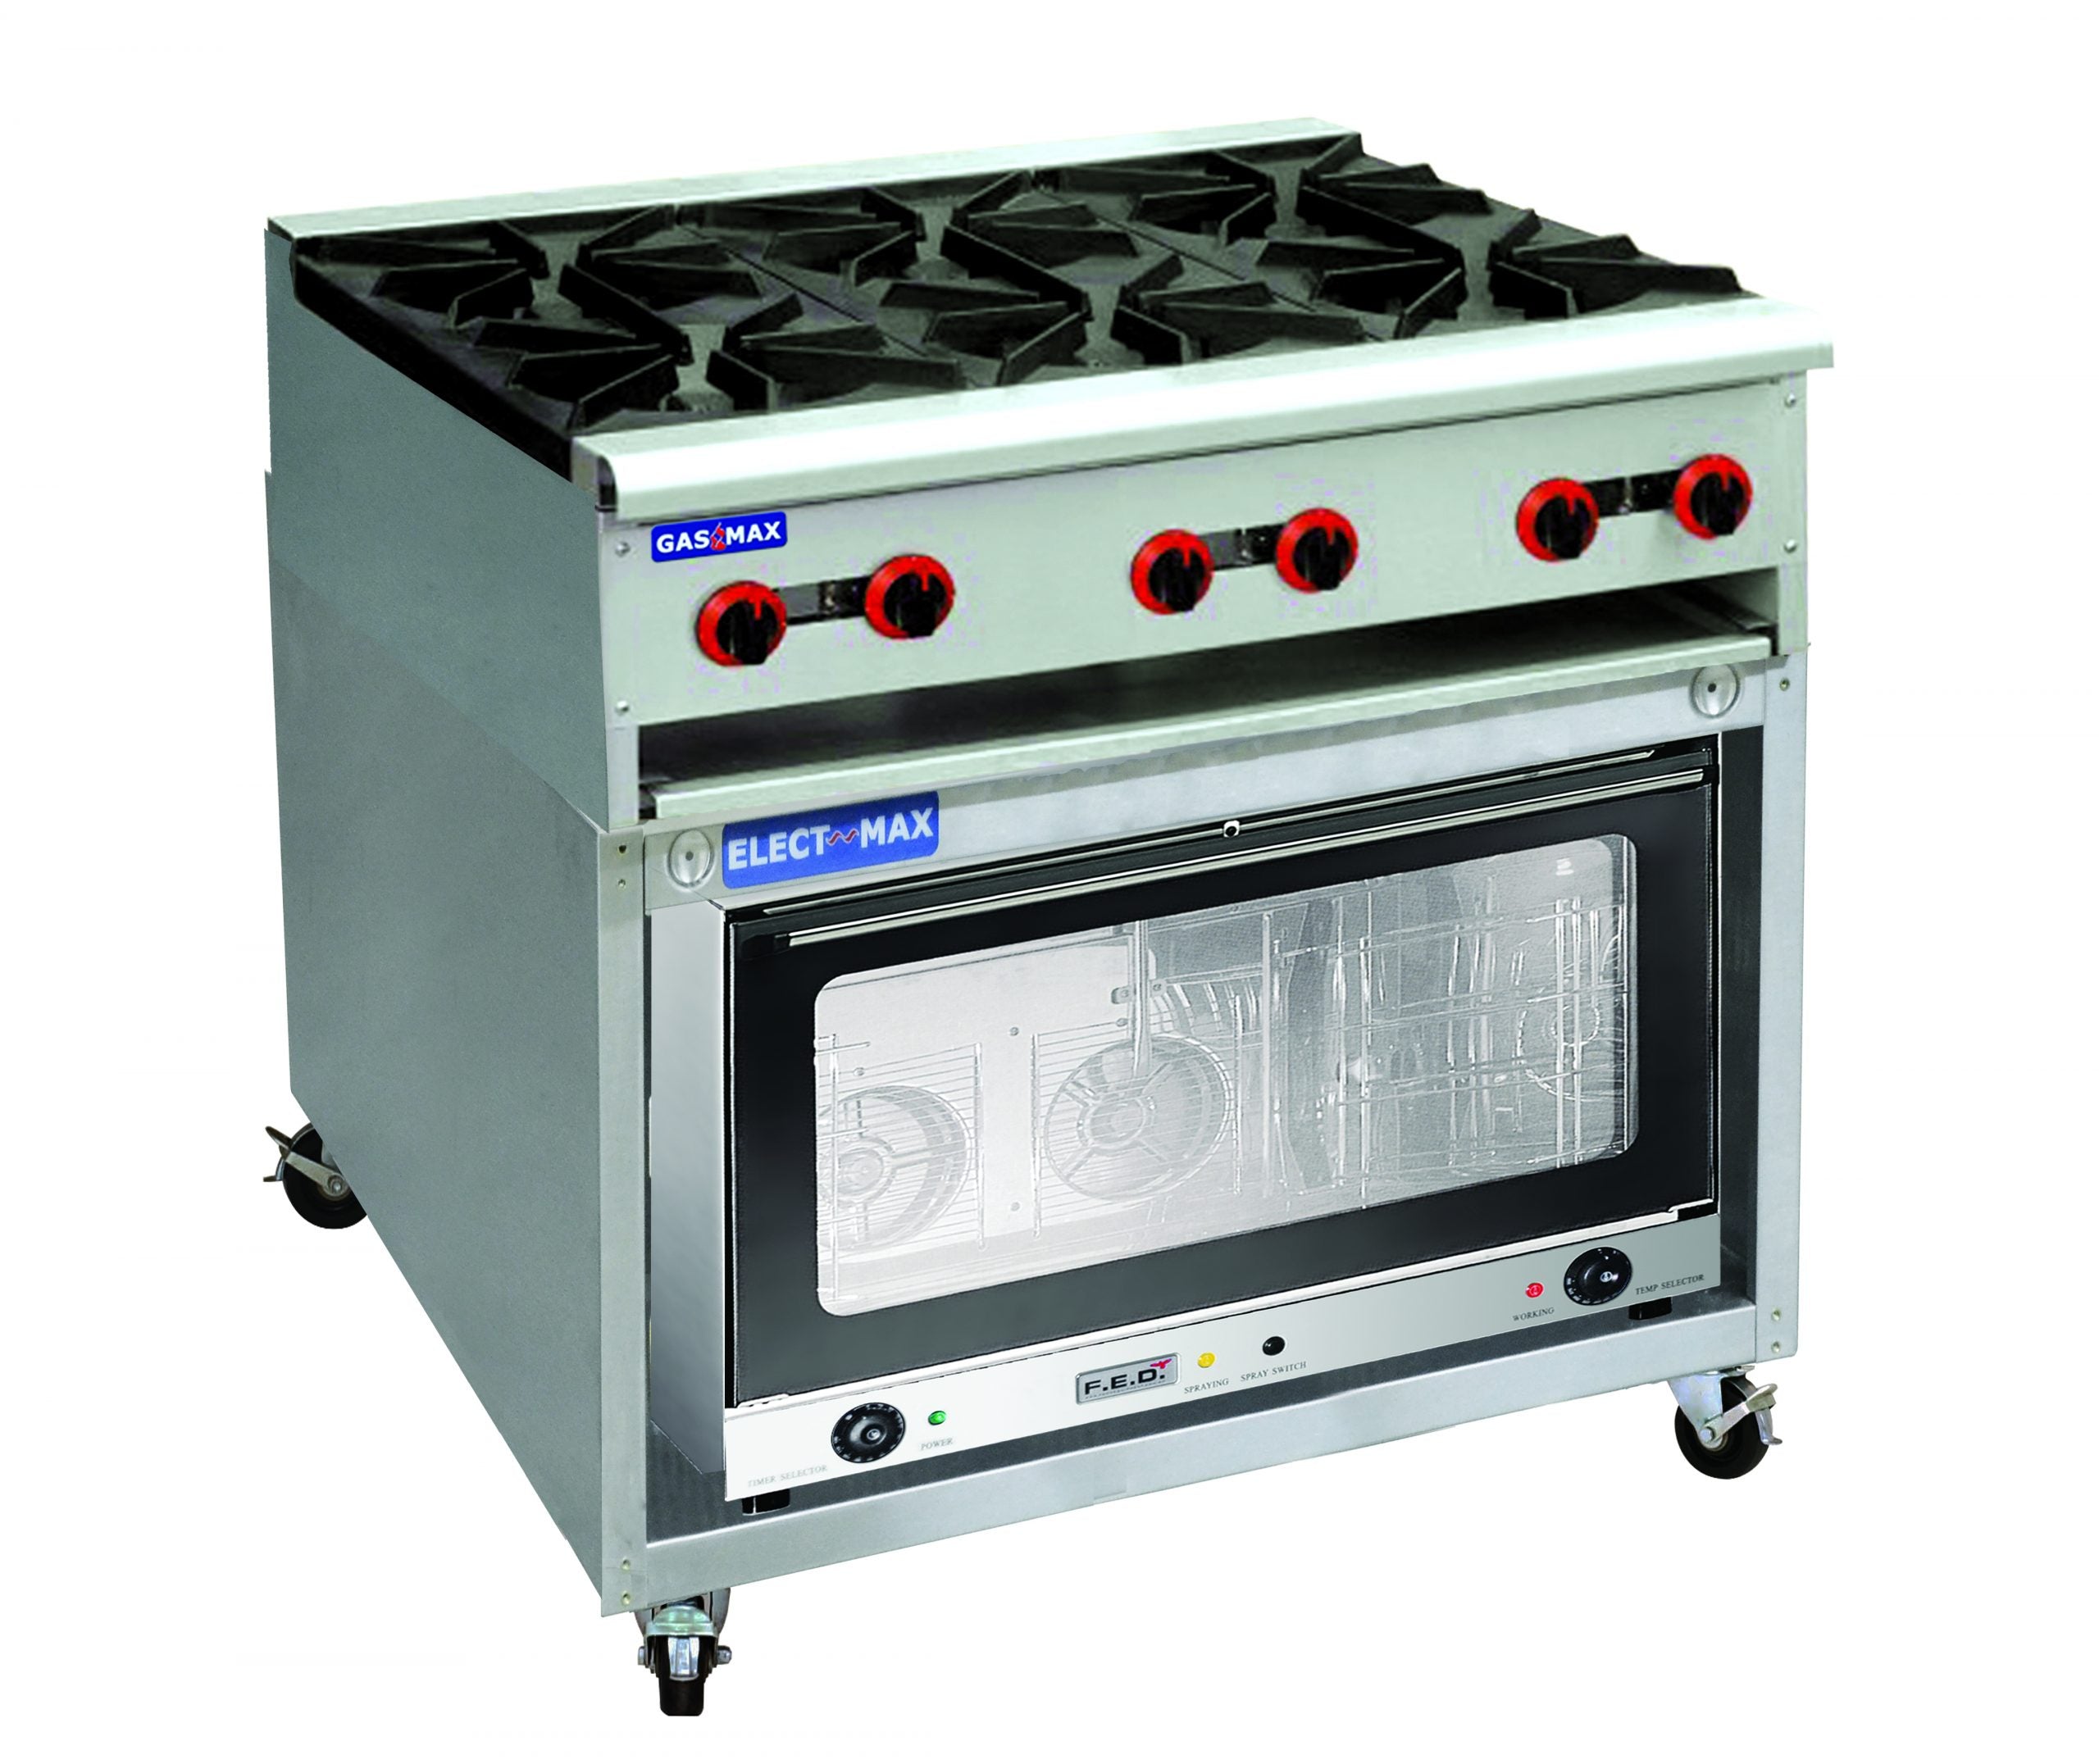 Gas Cooktop & Oven 800 series - RB6-YXD  - Gasmax